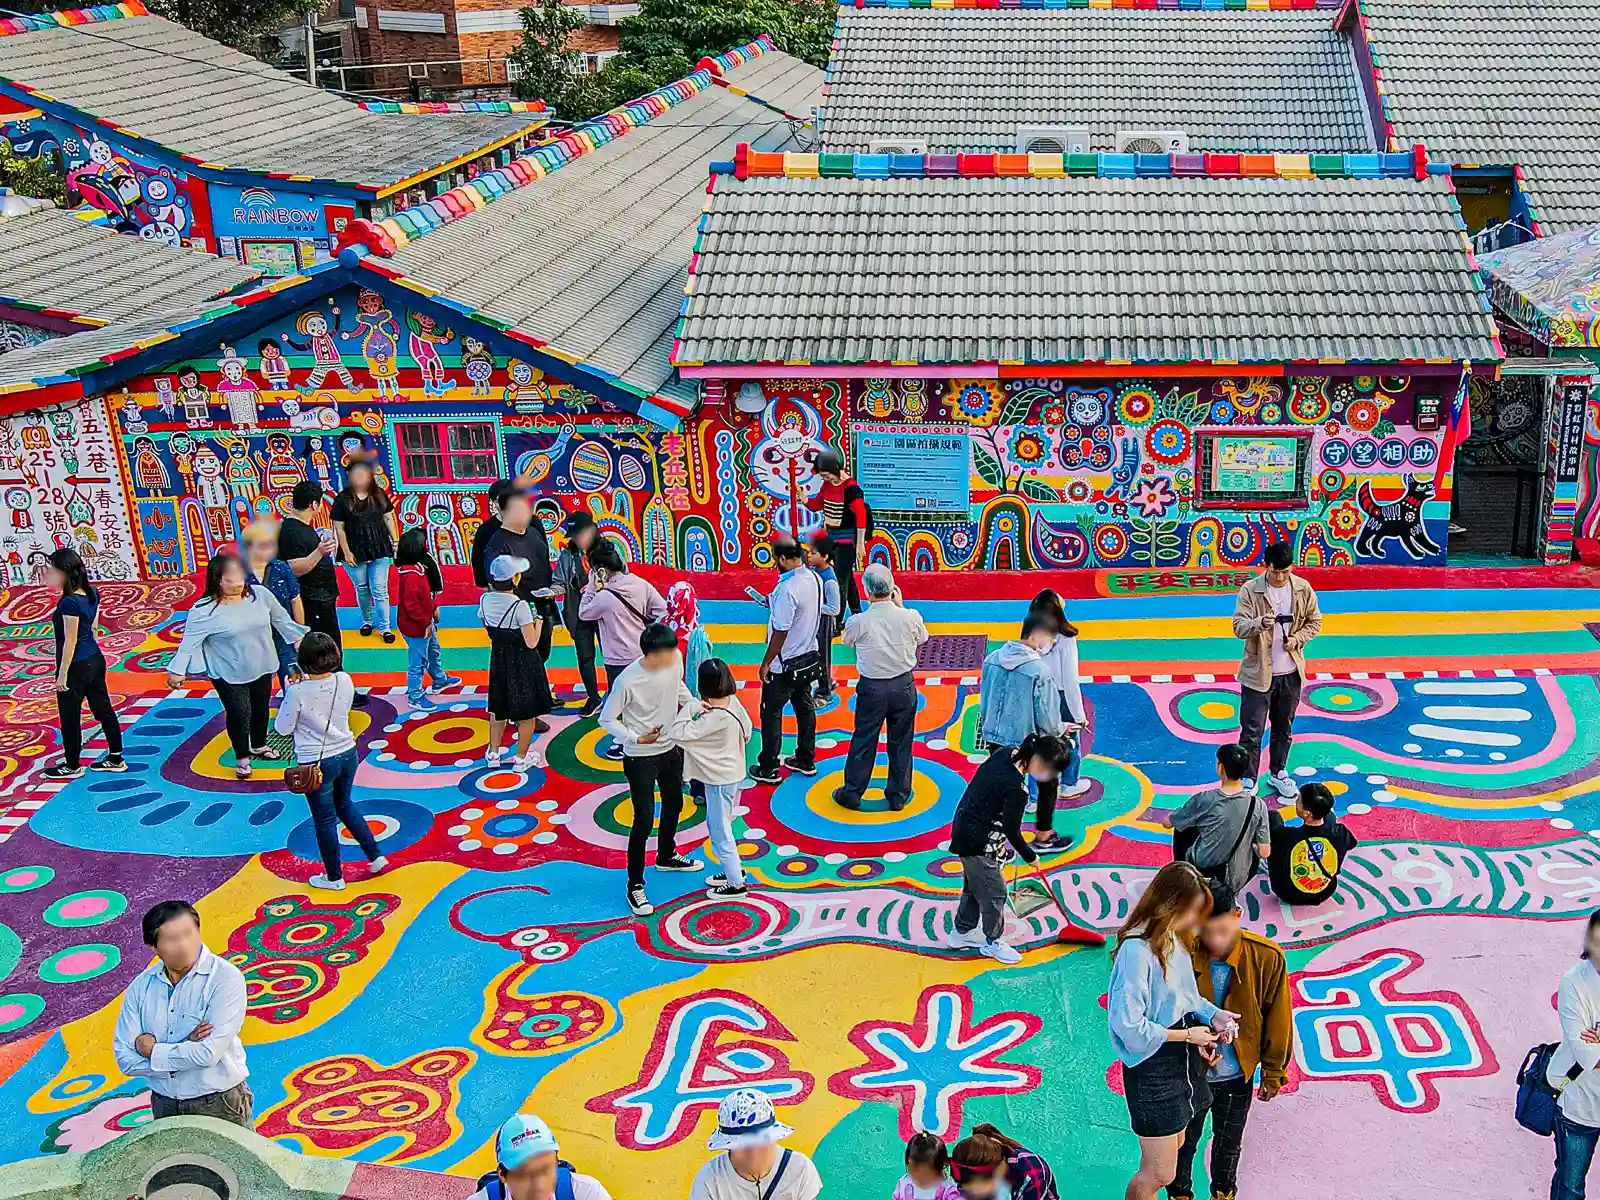 Tourists take photos and take in the surreal ambience of the colorful murals of Taichung's Rainbow Village